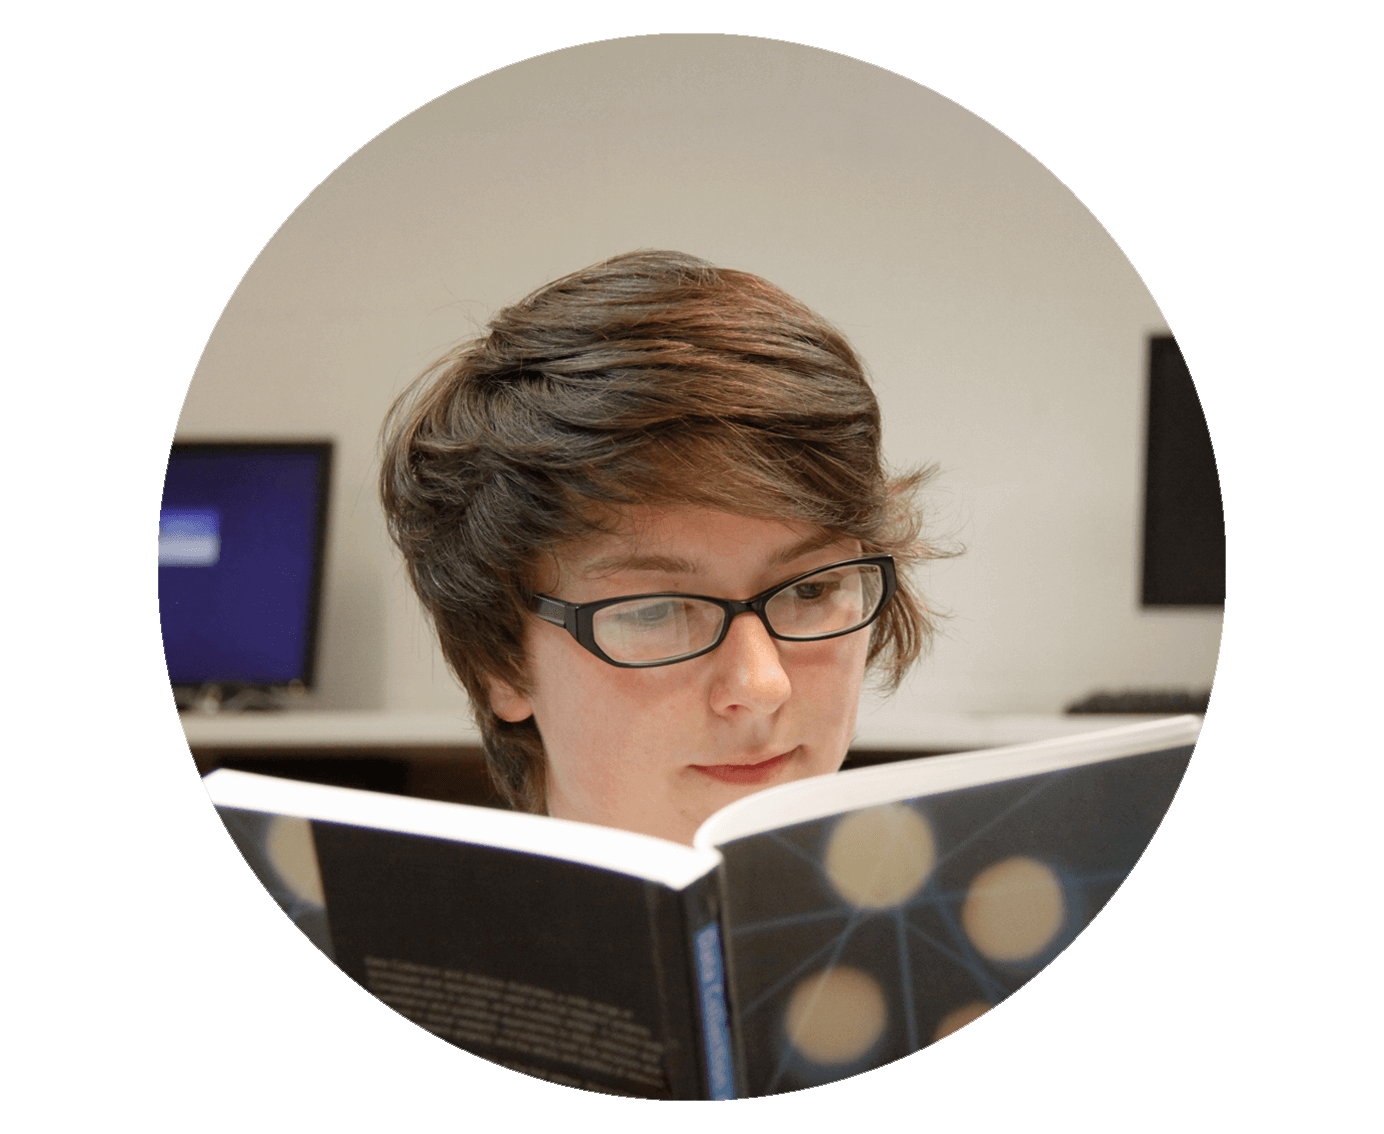 Image of a student reading a book